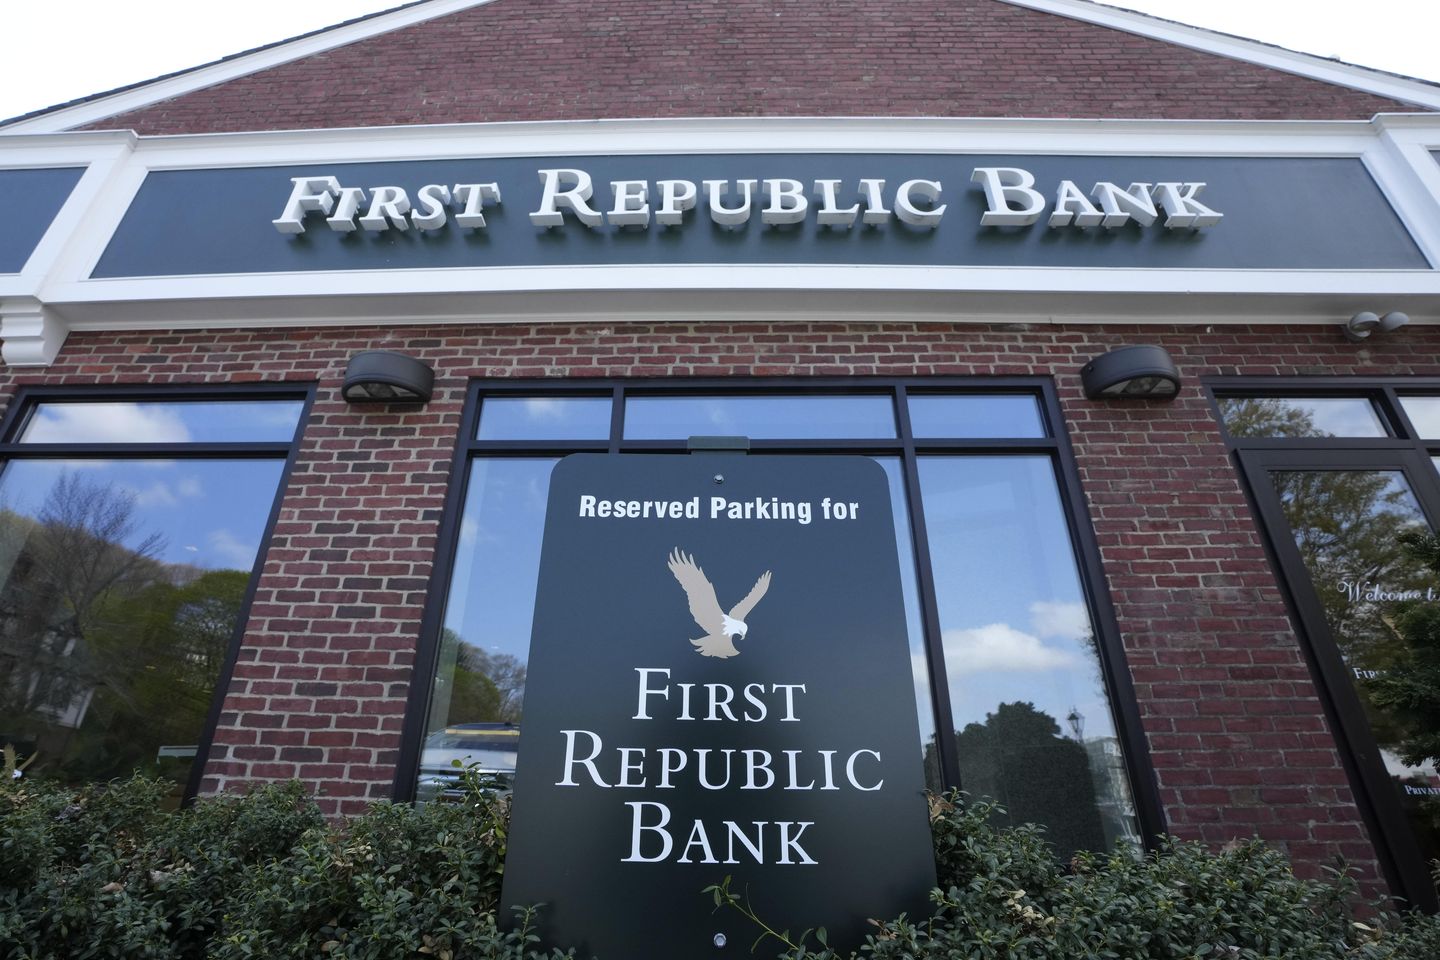 1,000 jobs cut at First Republic one month after acquired by JP Morgan Chase